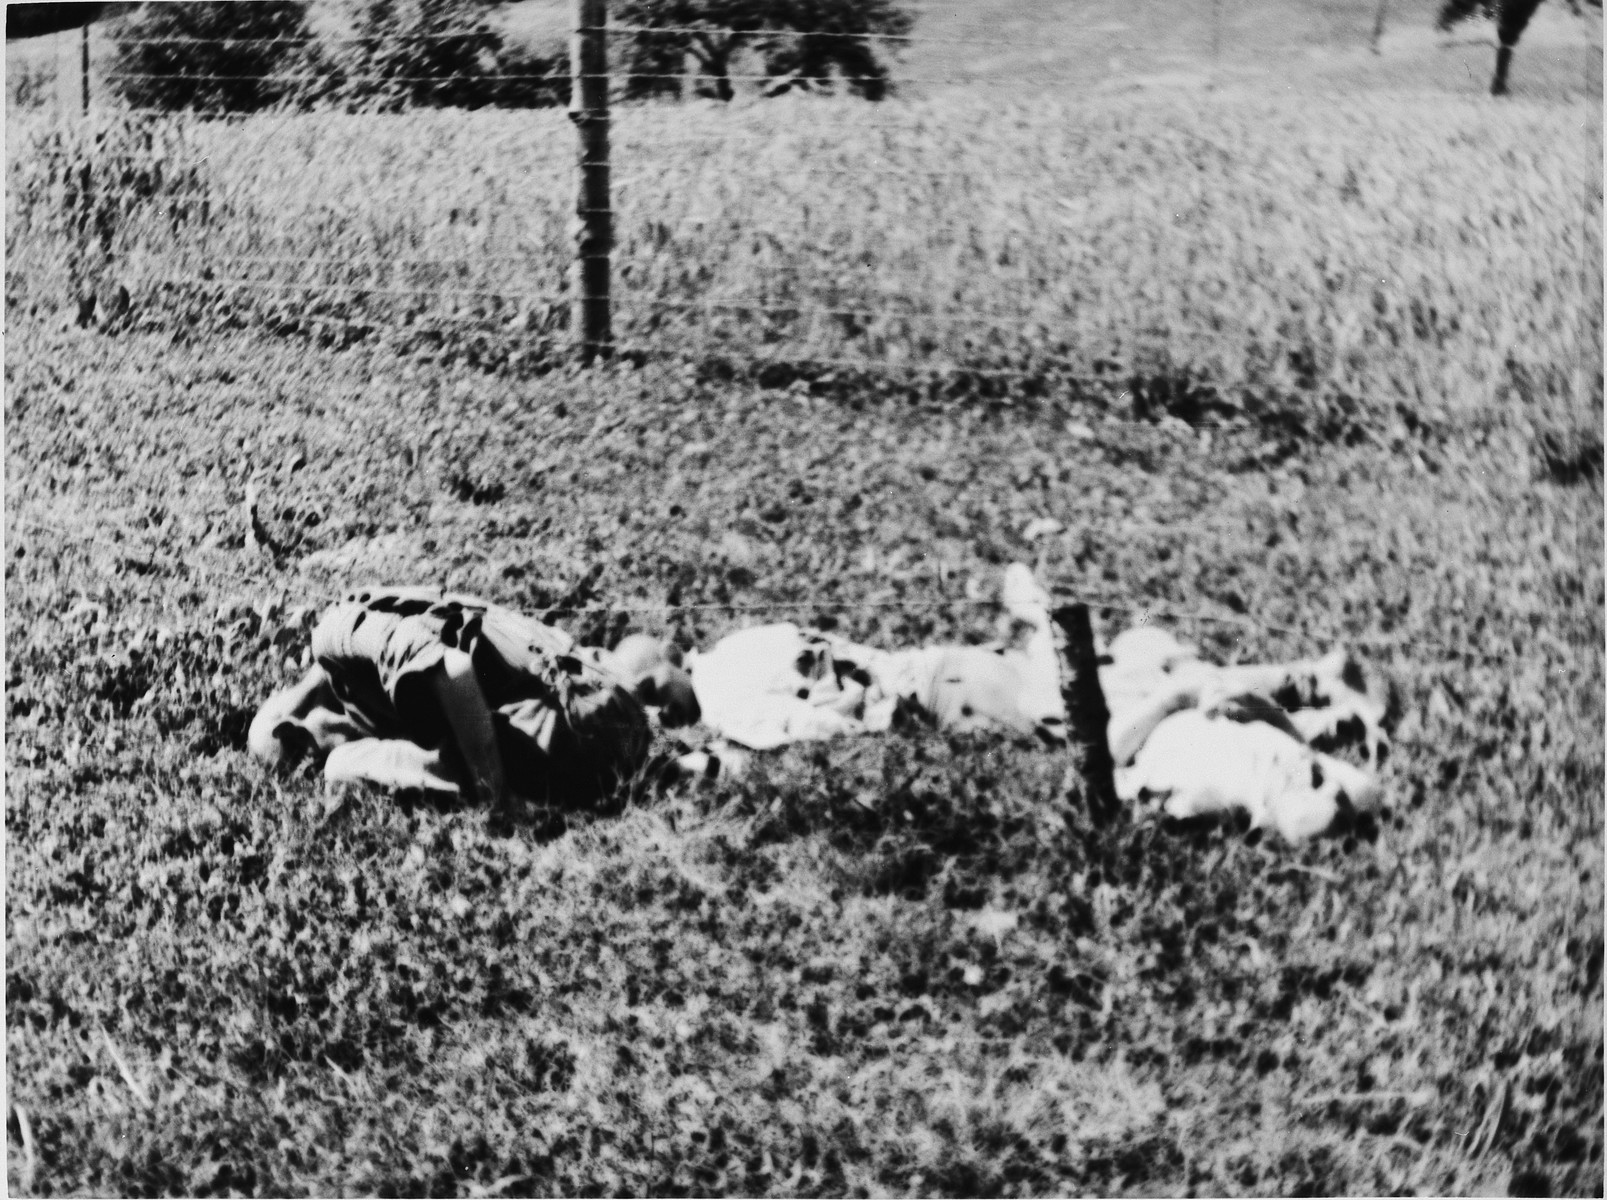 View of the bodies of former prisoners lying near the barbed wire fence in the Mauthausen concentration camp.